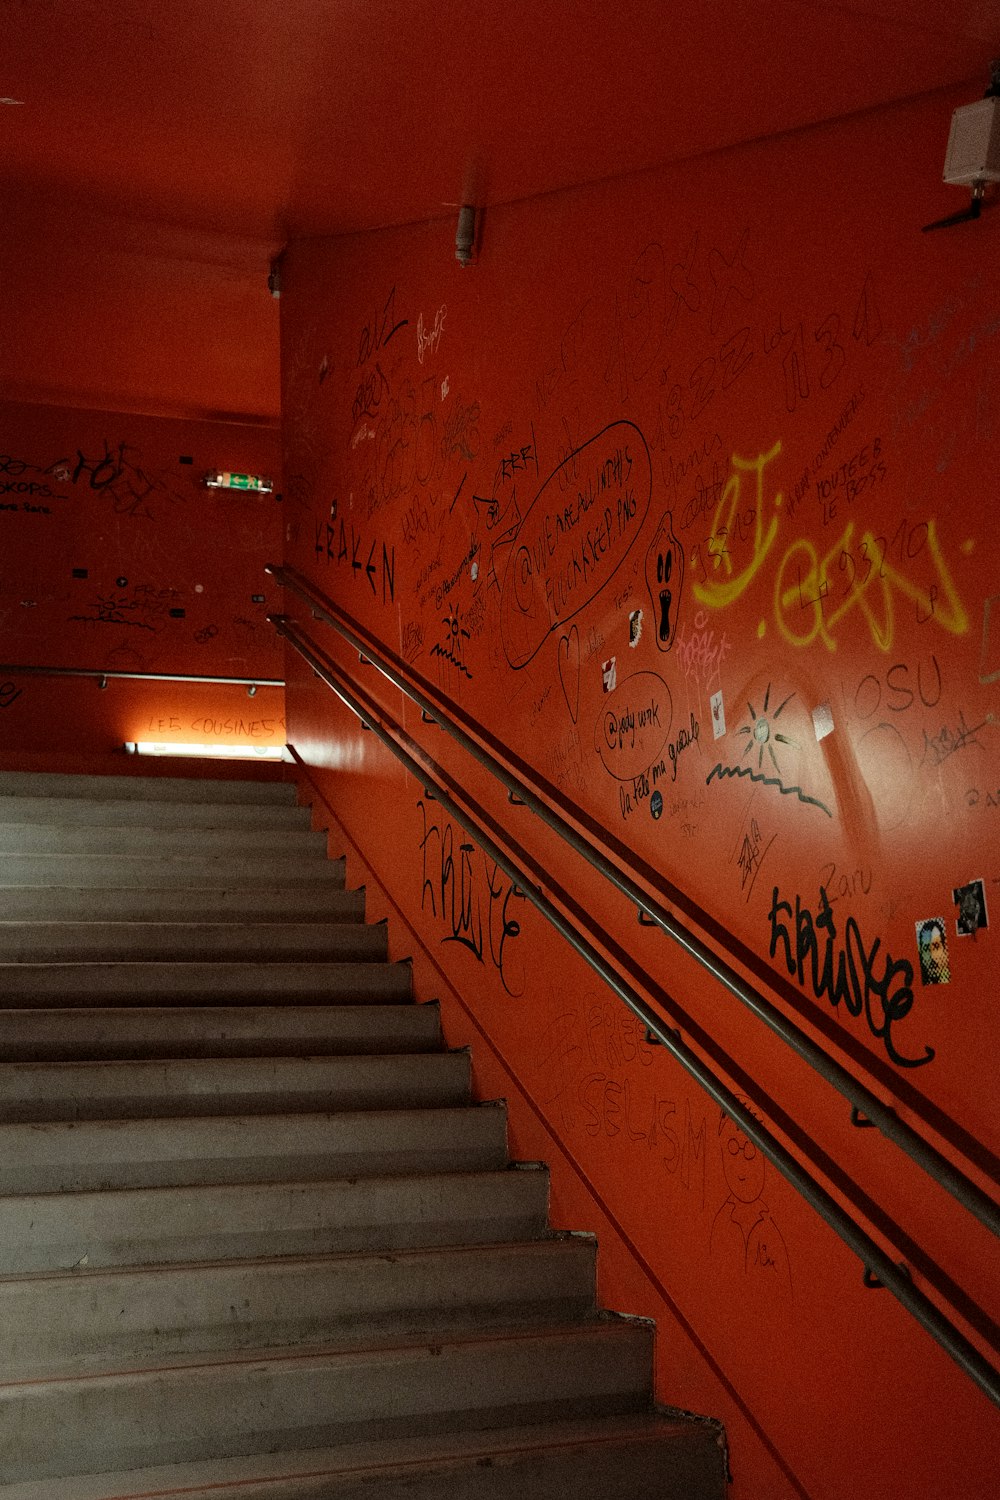 a stairwell with graffiti on the walls and stairs